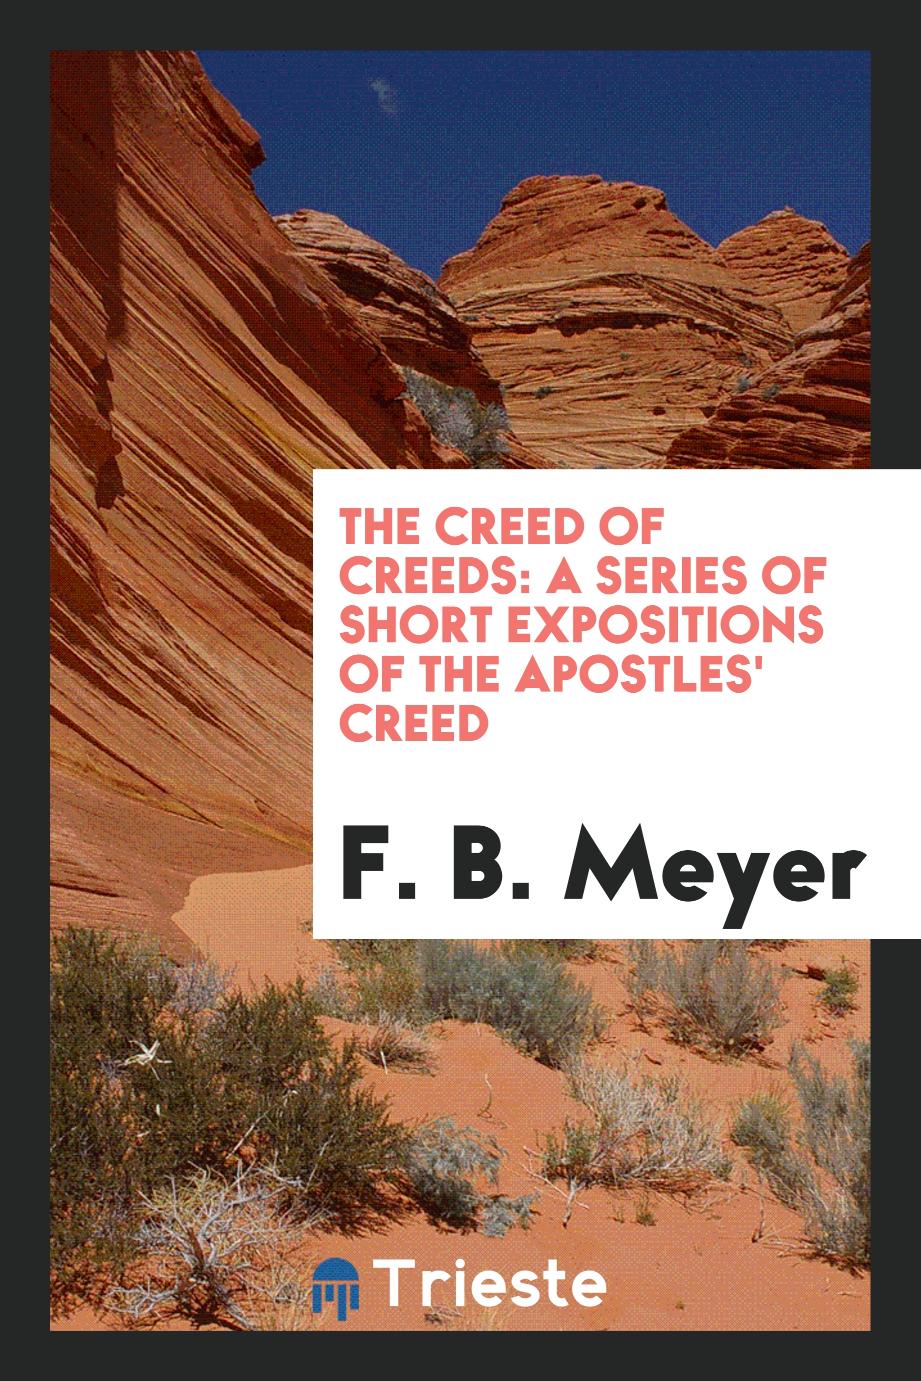 F. B. Meyer - The creed of creeds: a series of short expositions of the Apostles' Creed